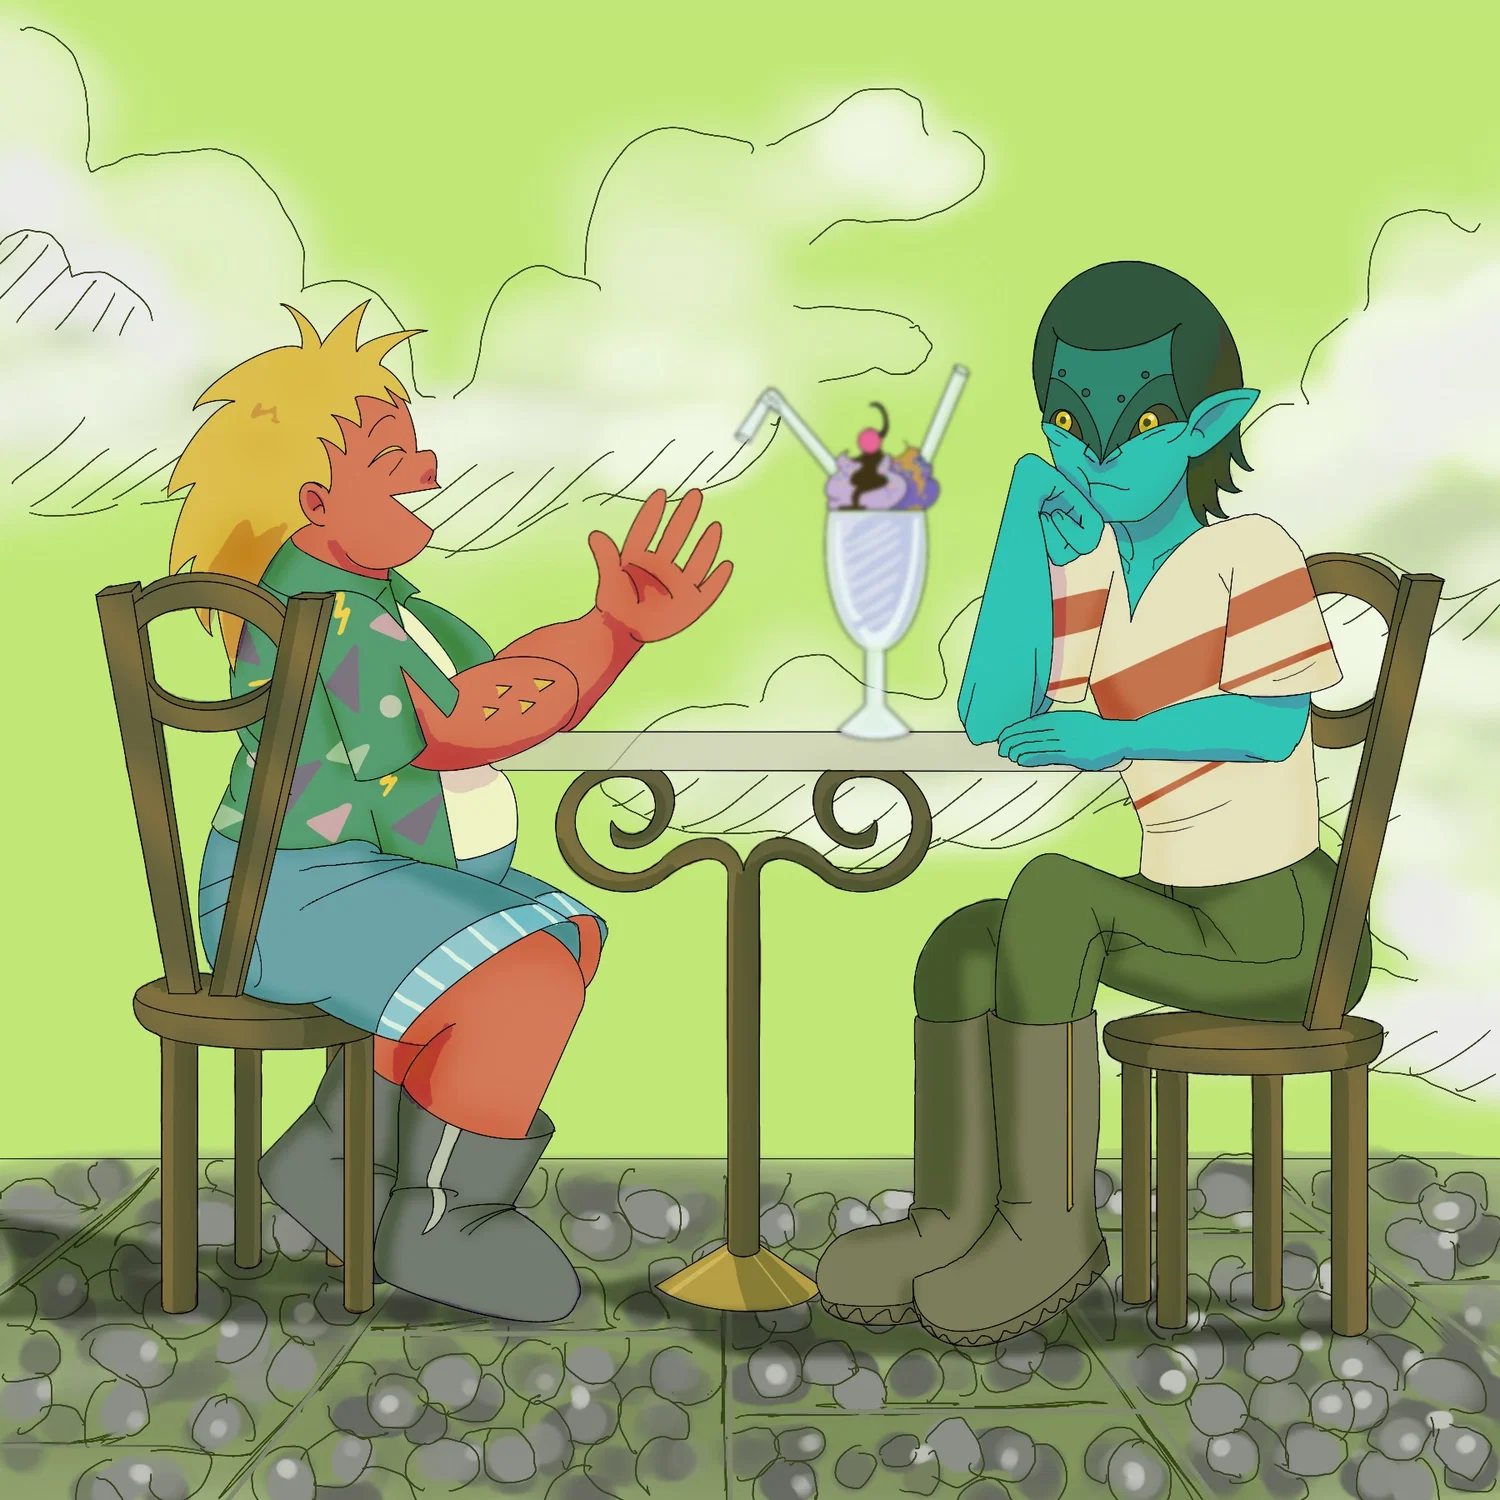 Lian and his partner Manny are on a cafe date under an alien green sky; Lian is talkative and active while Manny seemingly is uninterested in what Lian is saying